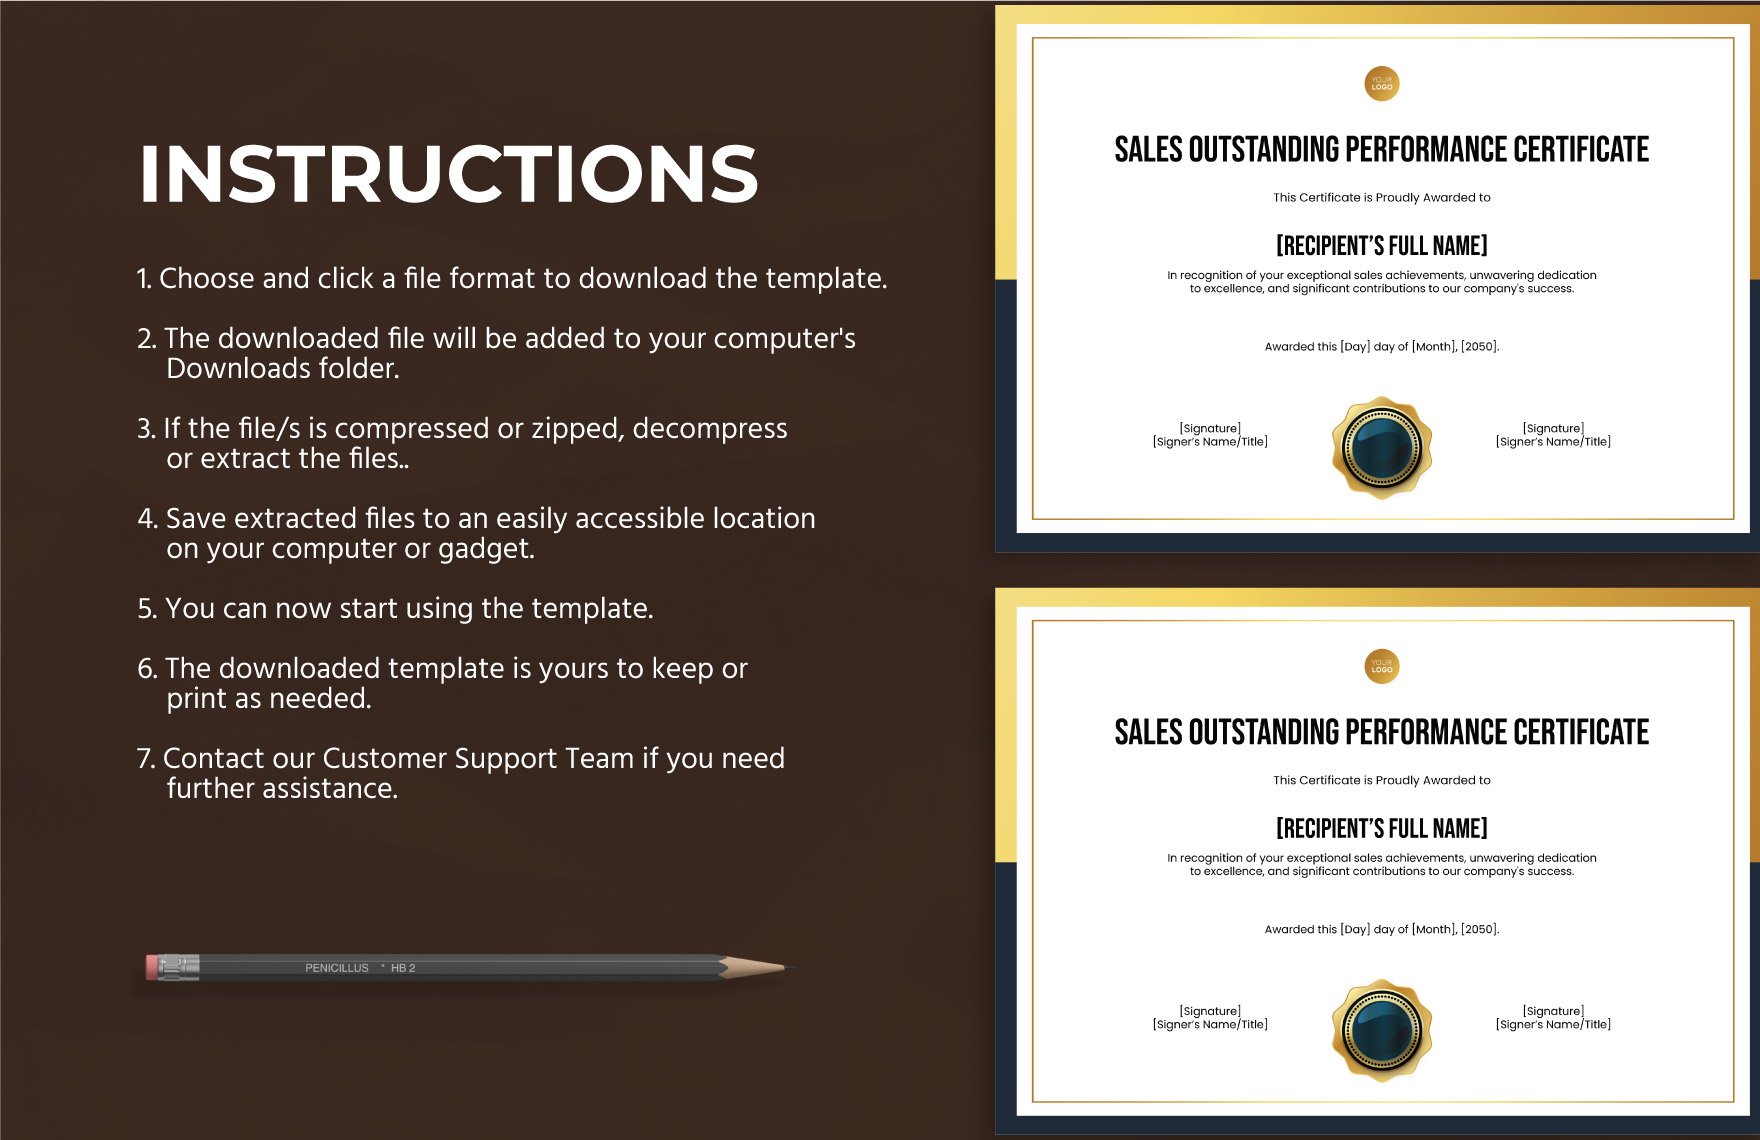 Sales Outstanding Performance Certificate Template